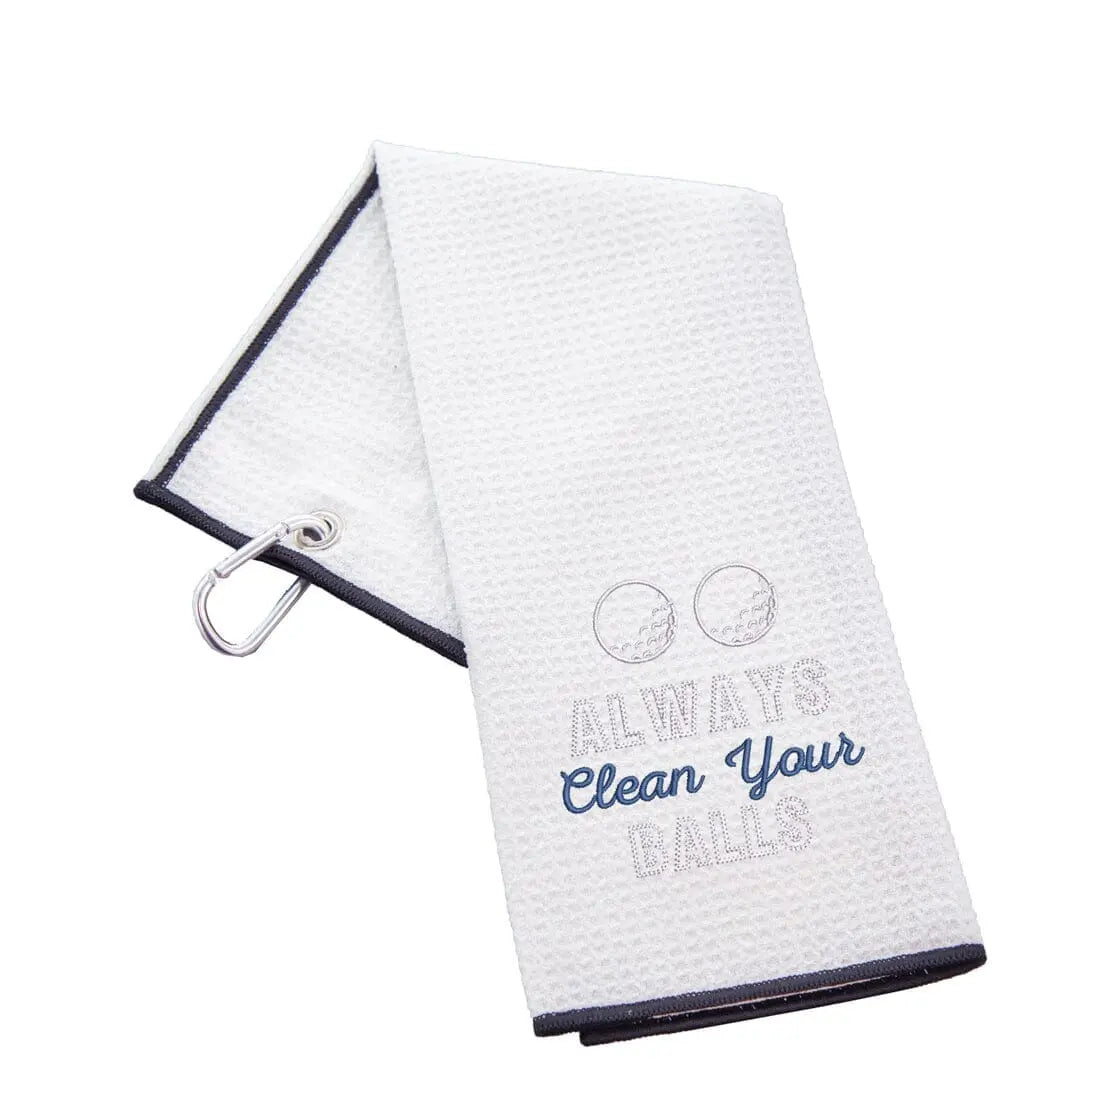 Tri-Fold Golf Towel Embroidered With Cheeky Clean Your Balls Logo - Duncan Stewart 1978 Waffle-White Duncan Stewart 1978